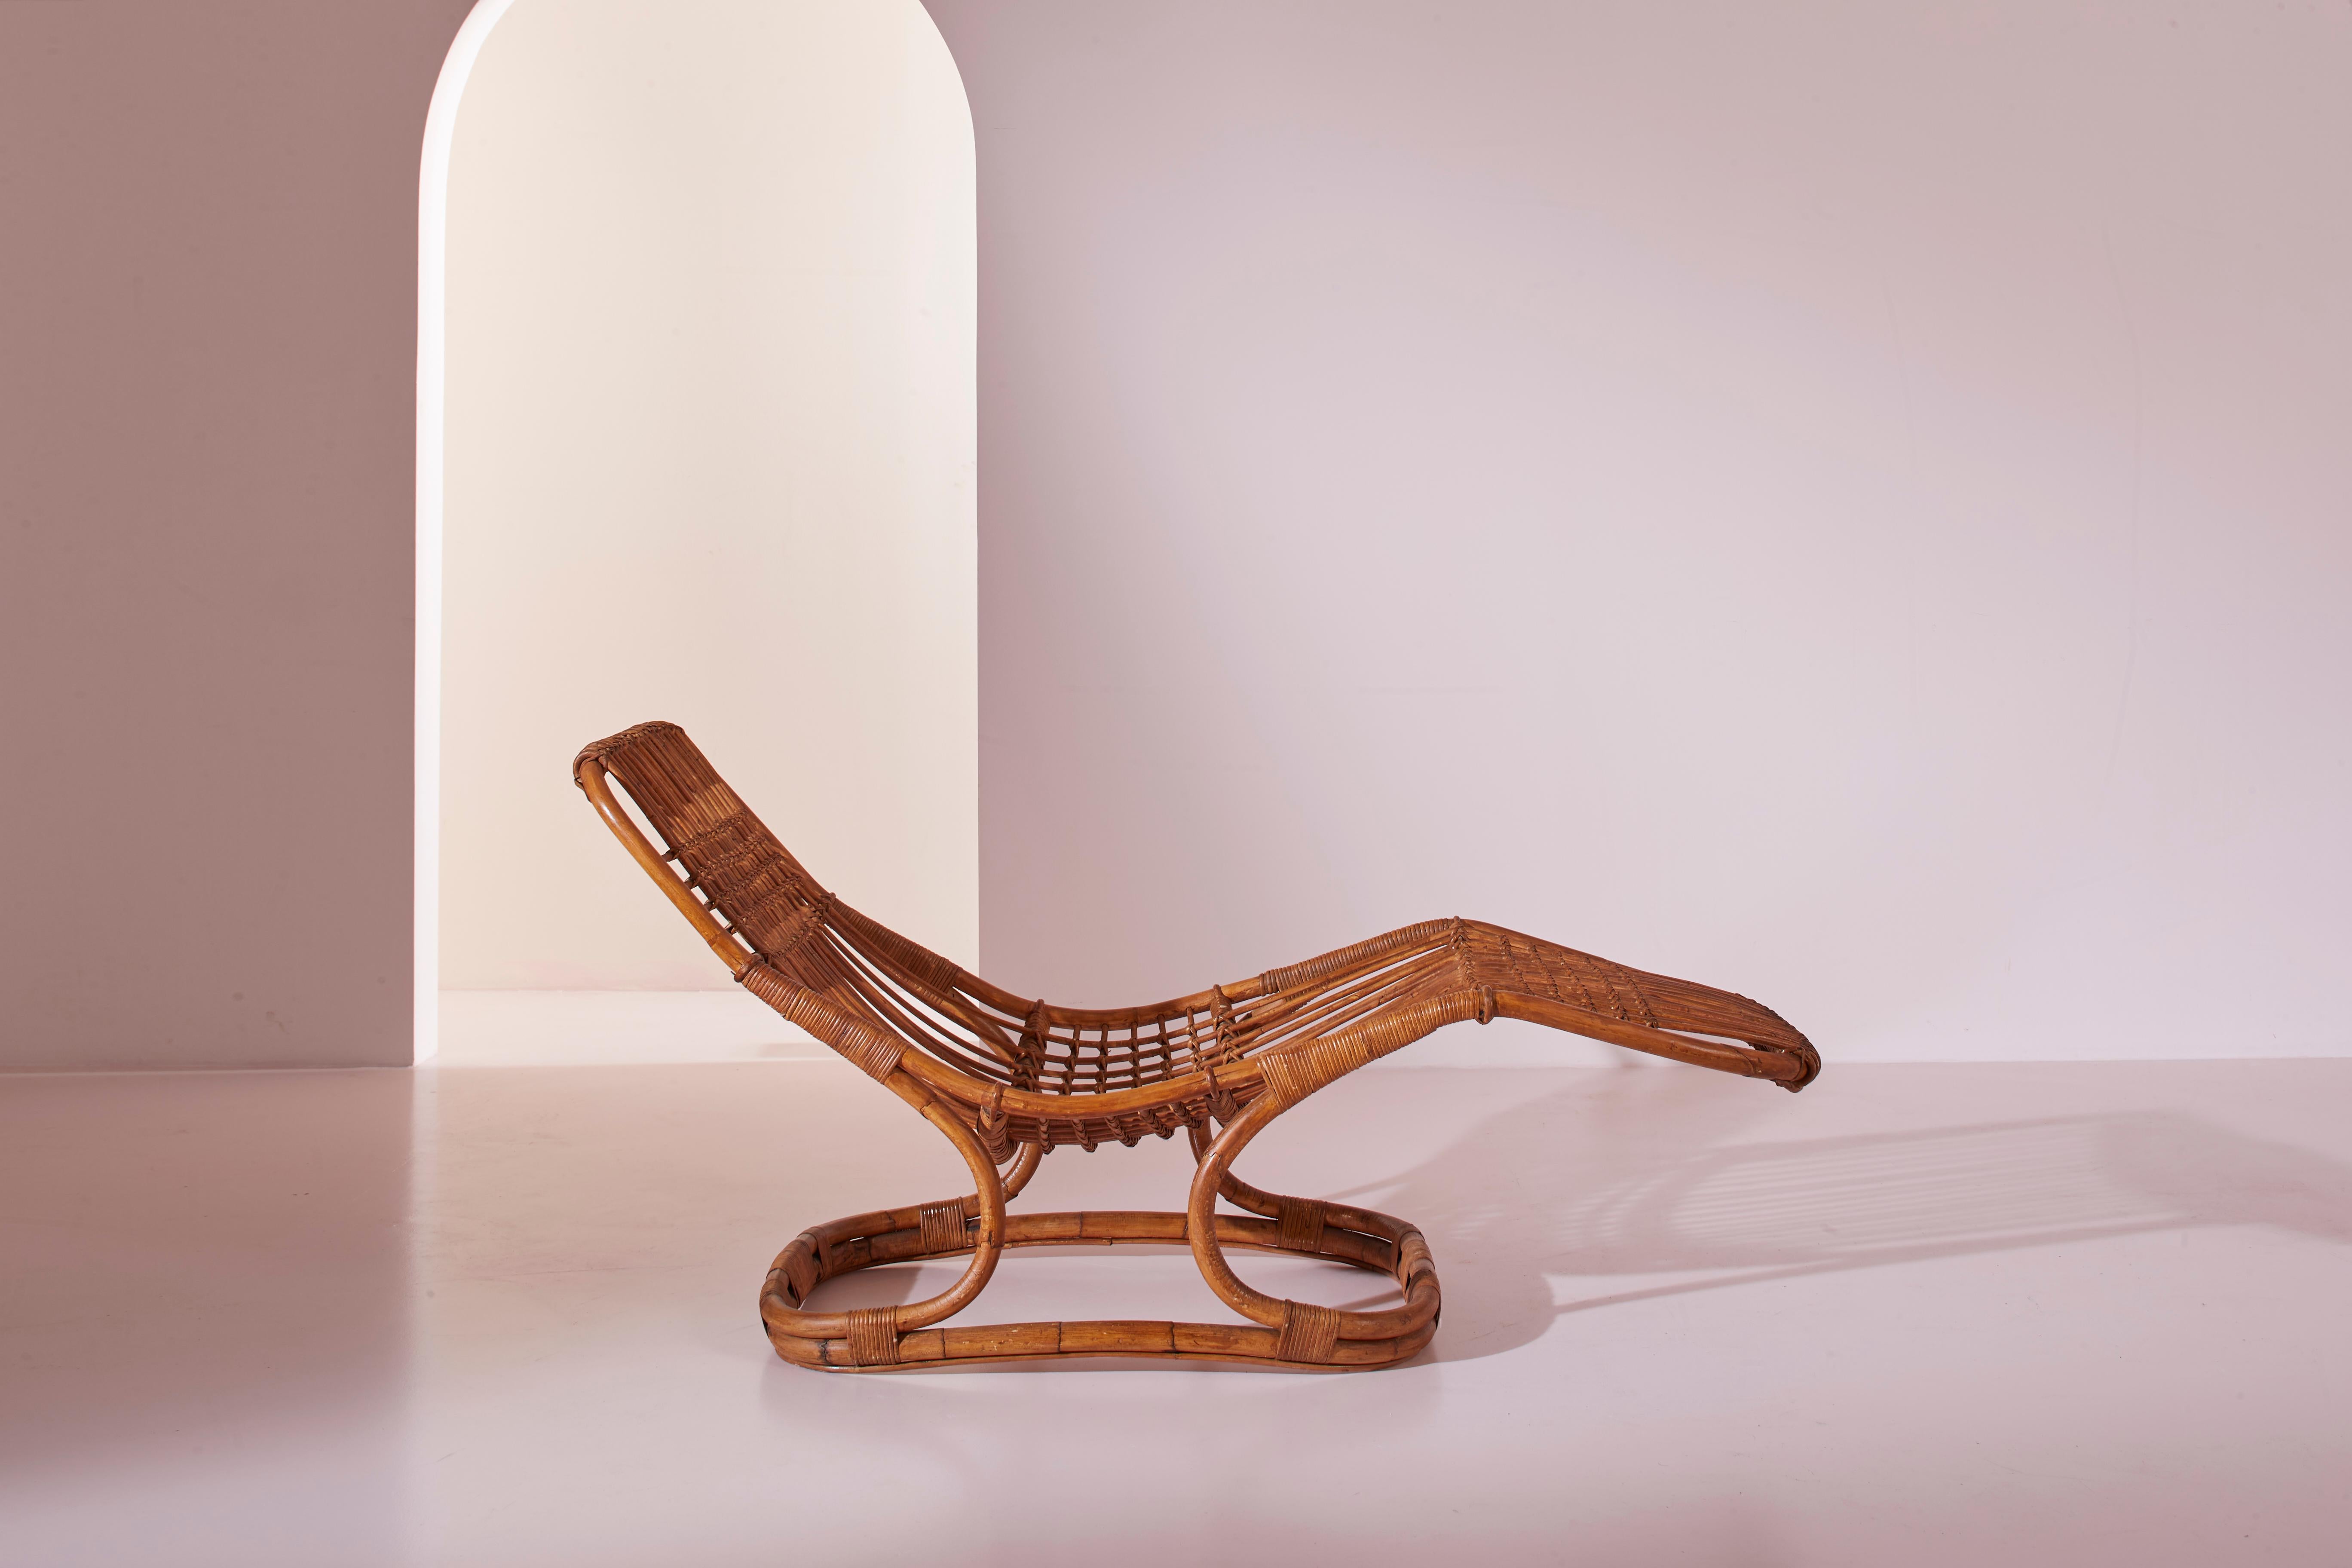 A chaise longue in wicker and rattan, designed by Tito Agnoli, produced by Pierantonio Bonacina in the 1960s

The distinctive feature of this relaxing seat lies in the remarkable plasticity of the natural material used, which perfectly accommodates